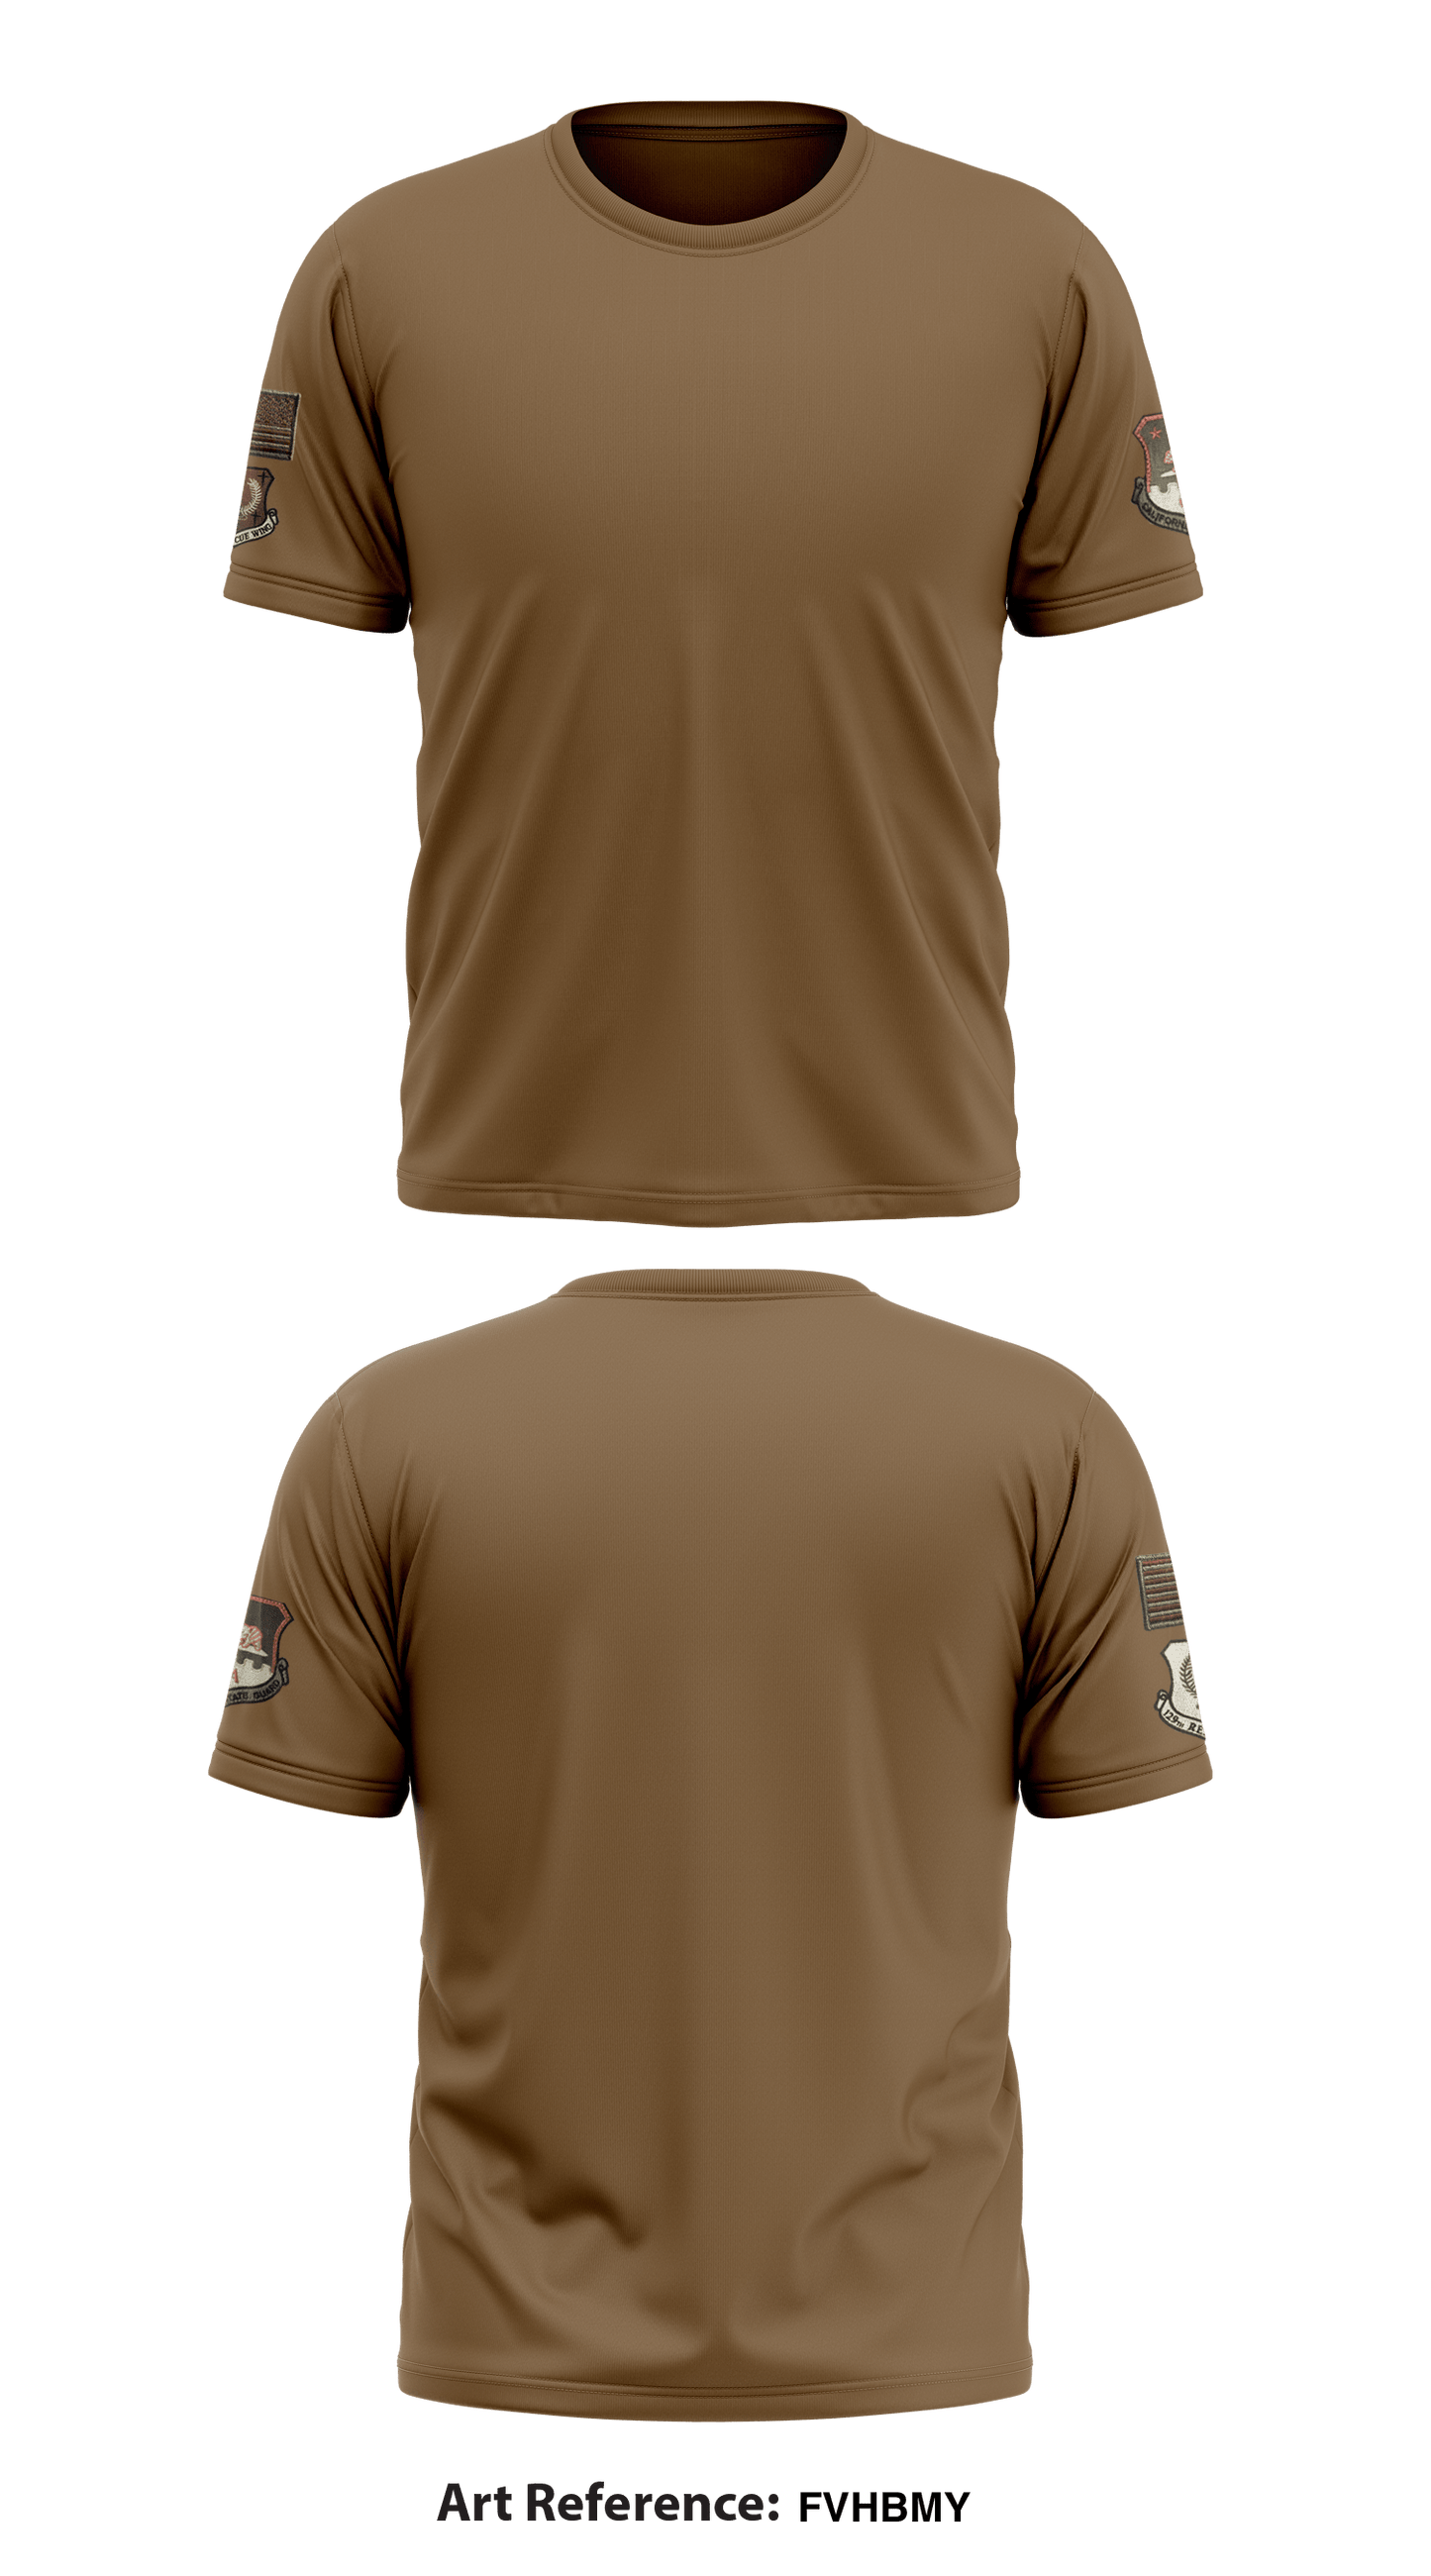 129th Search and Rescue Core Men's SS Performance Tee - fVhbmy